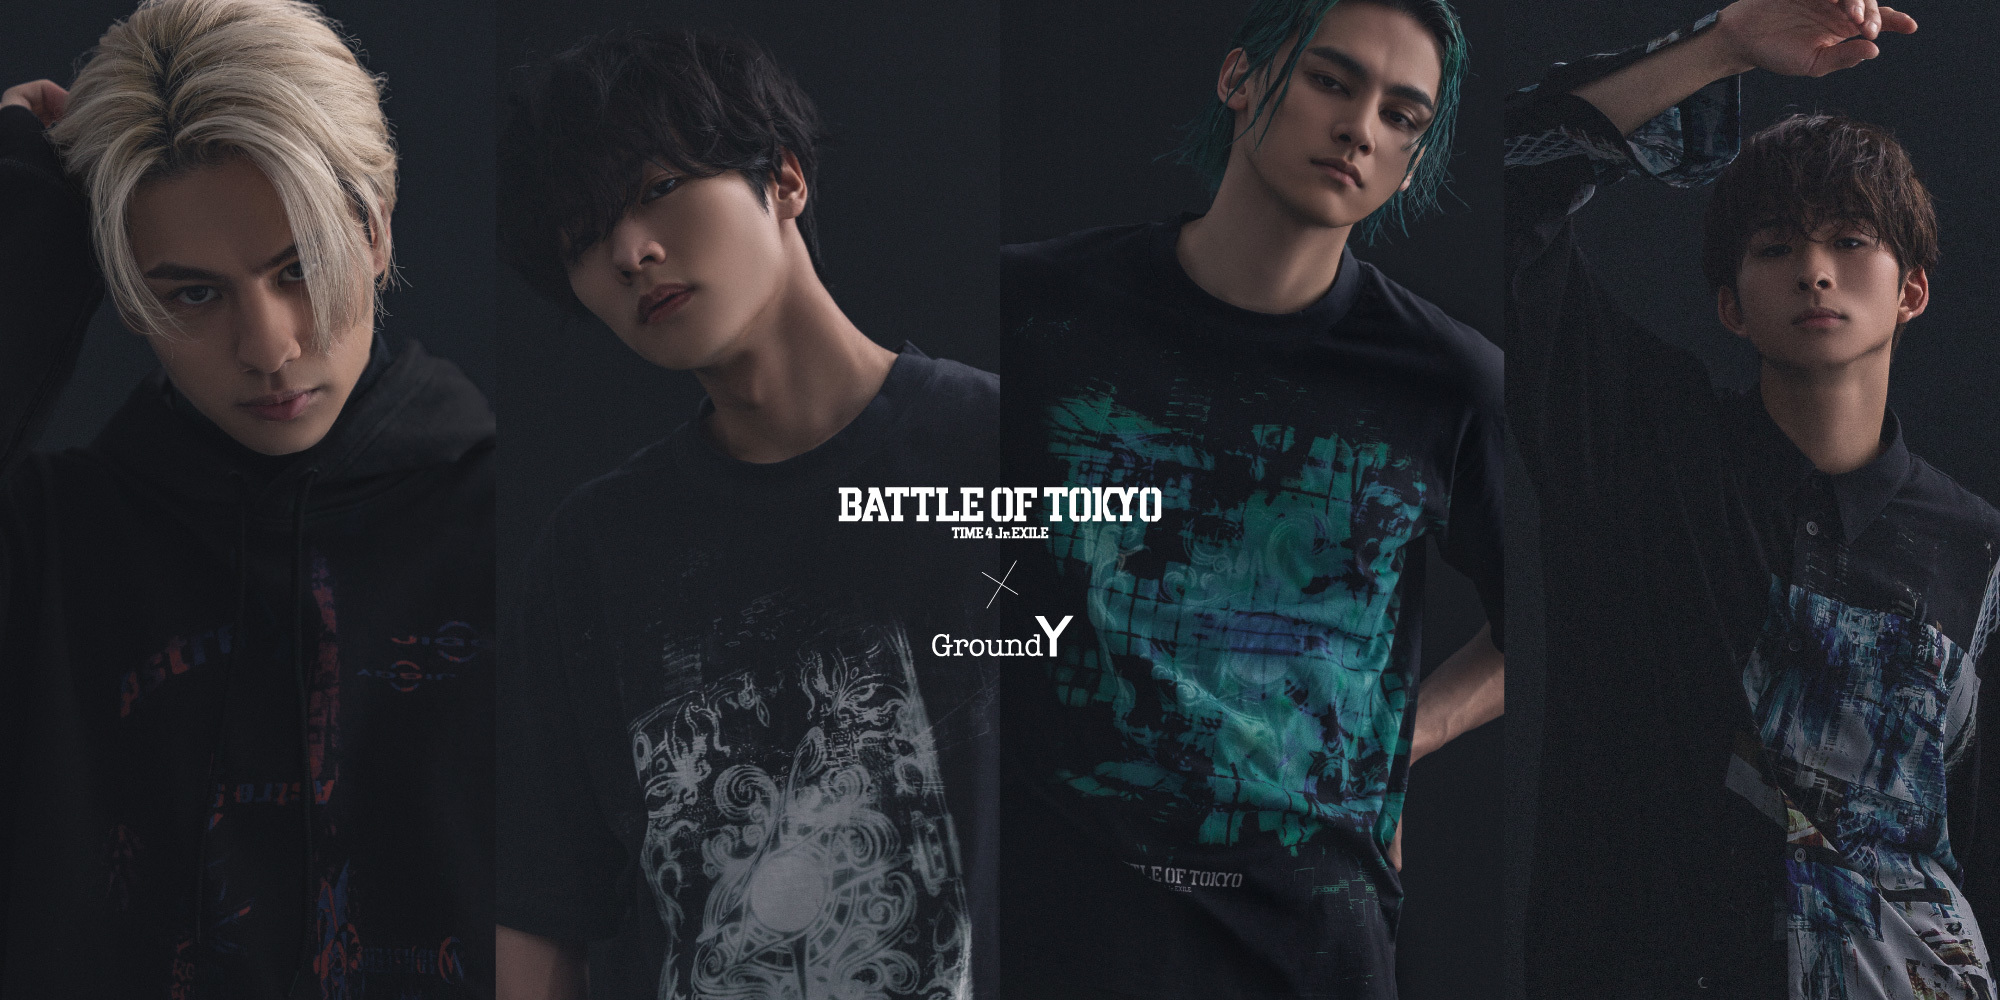 THE RAMPAGE川村壱馬らがBATTLE OF TOKYO×Ground Yコラボアイテムを 